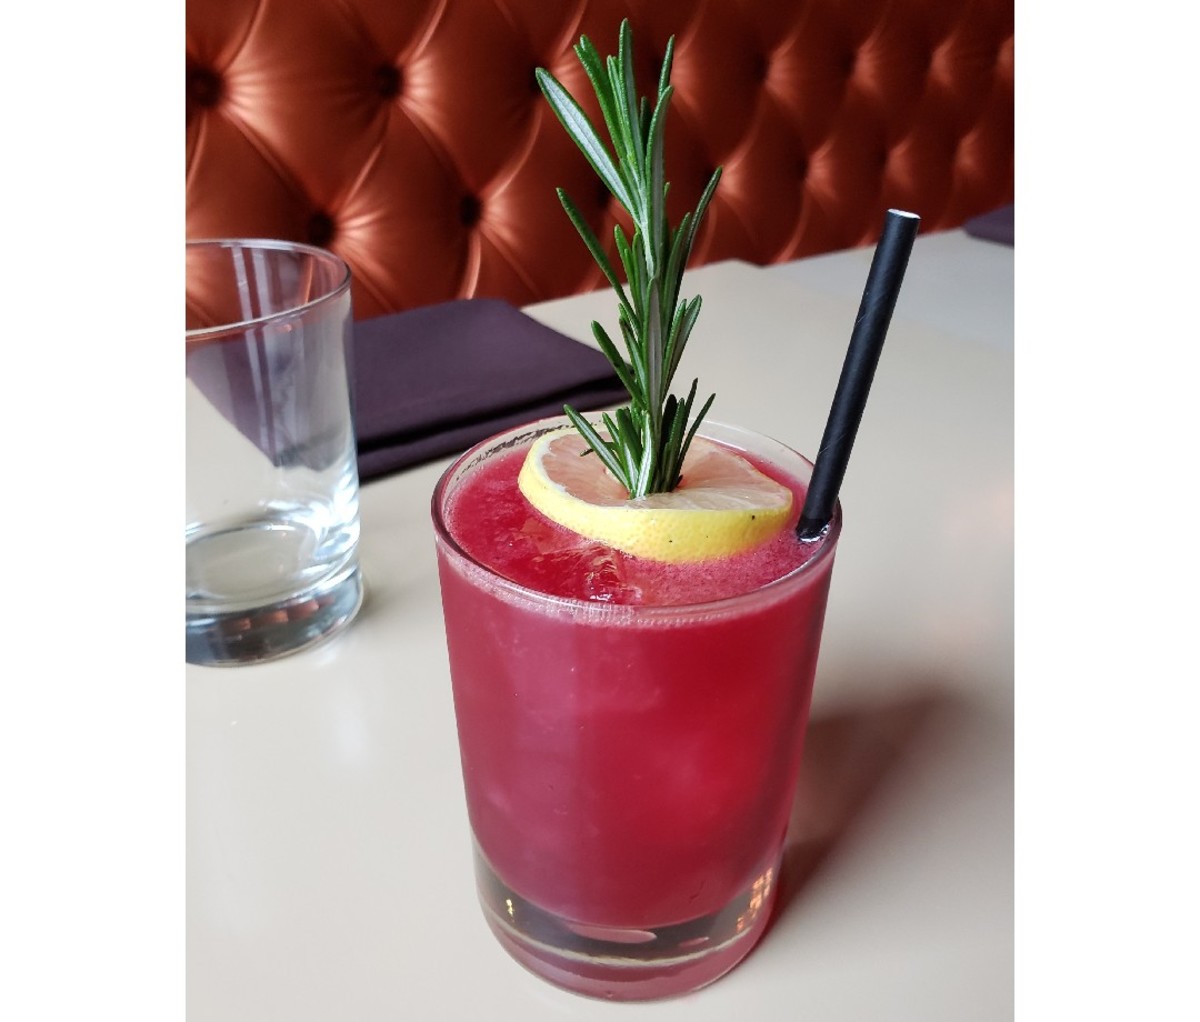 Beet cocktail with lemon and rosemary sprig as garnish